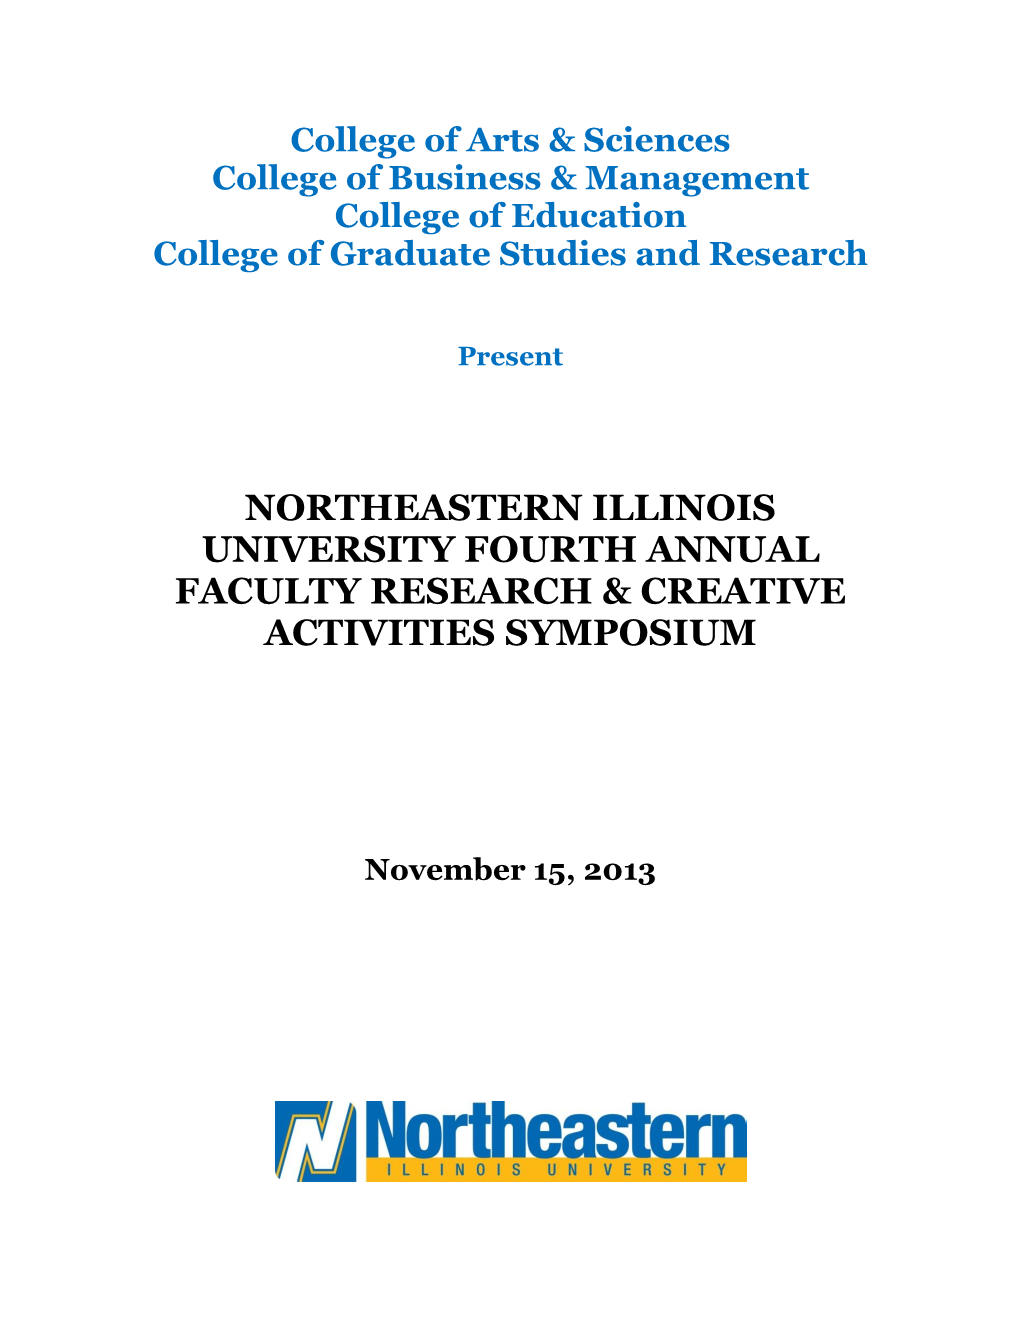 Northeastern Illinois University Fourth Annual Faculty Research & Creative Activities Symposium